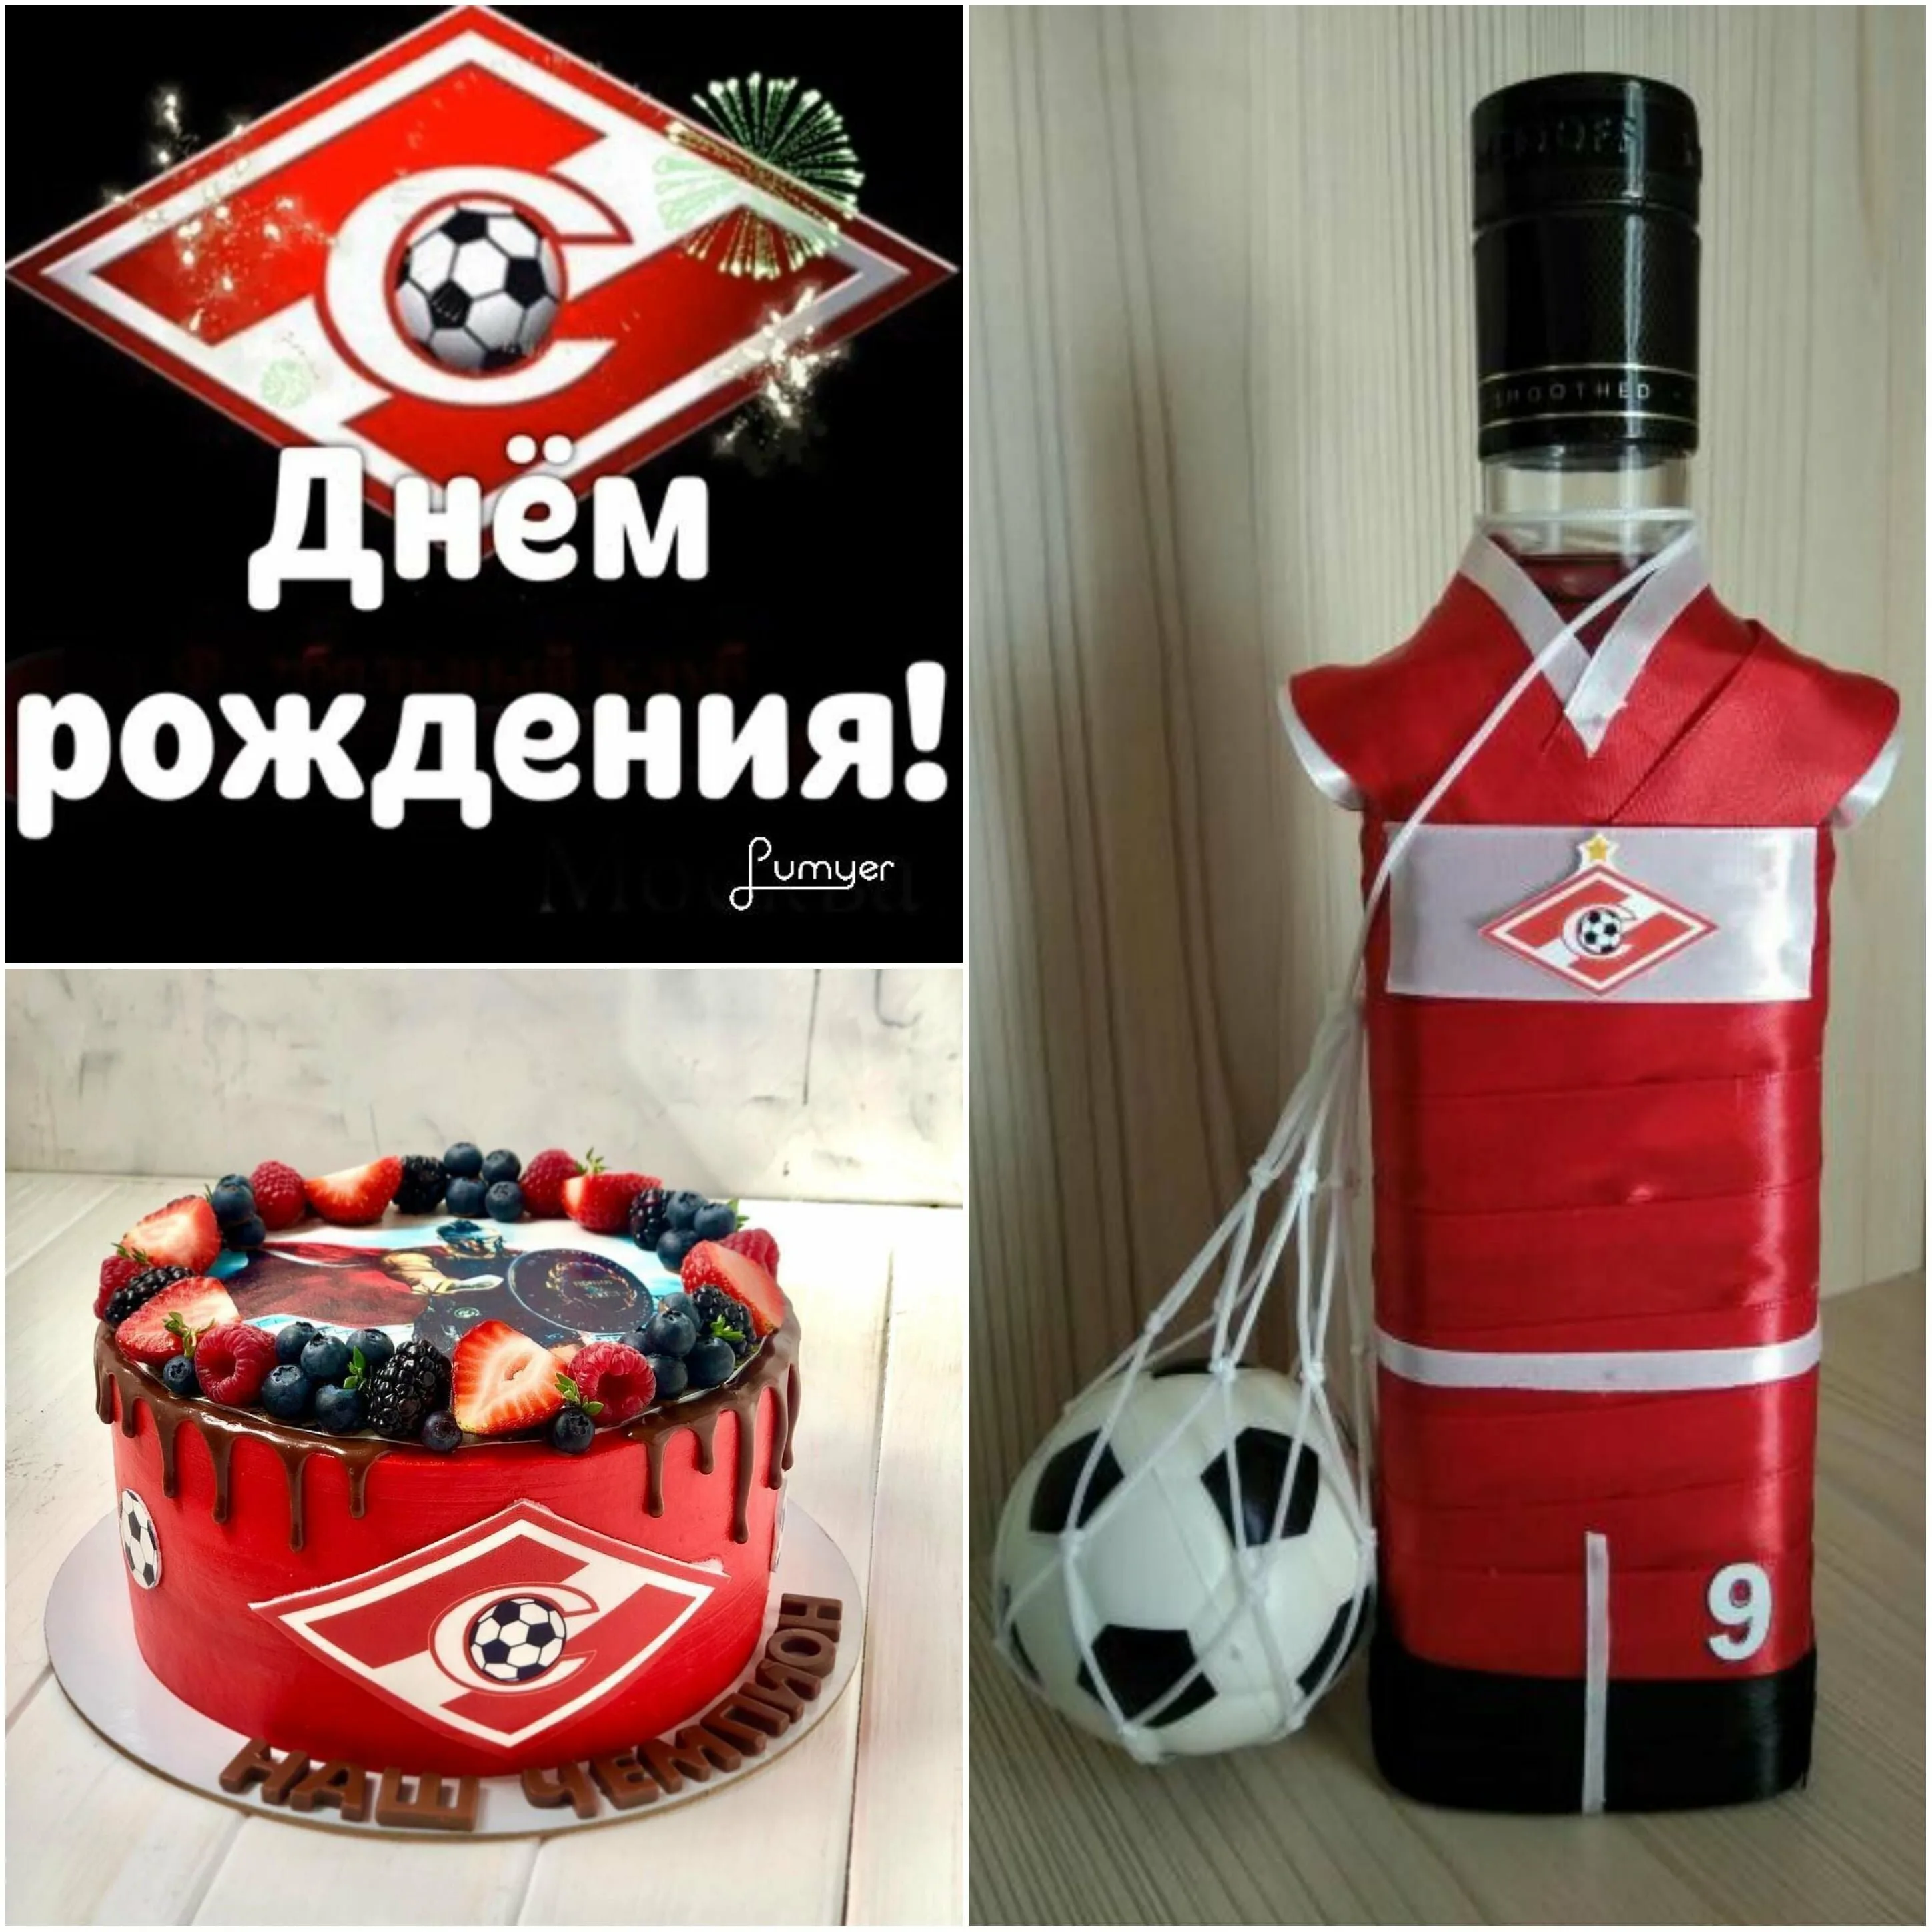 Фото Spartak's name day, congratulations to Spartak #6